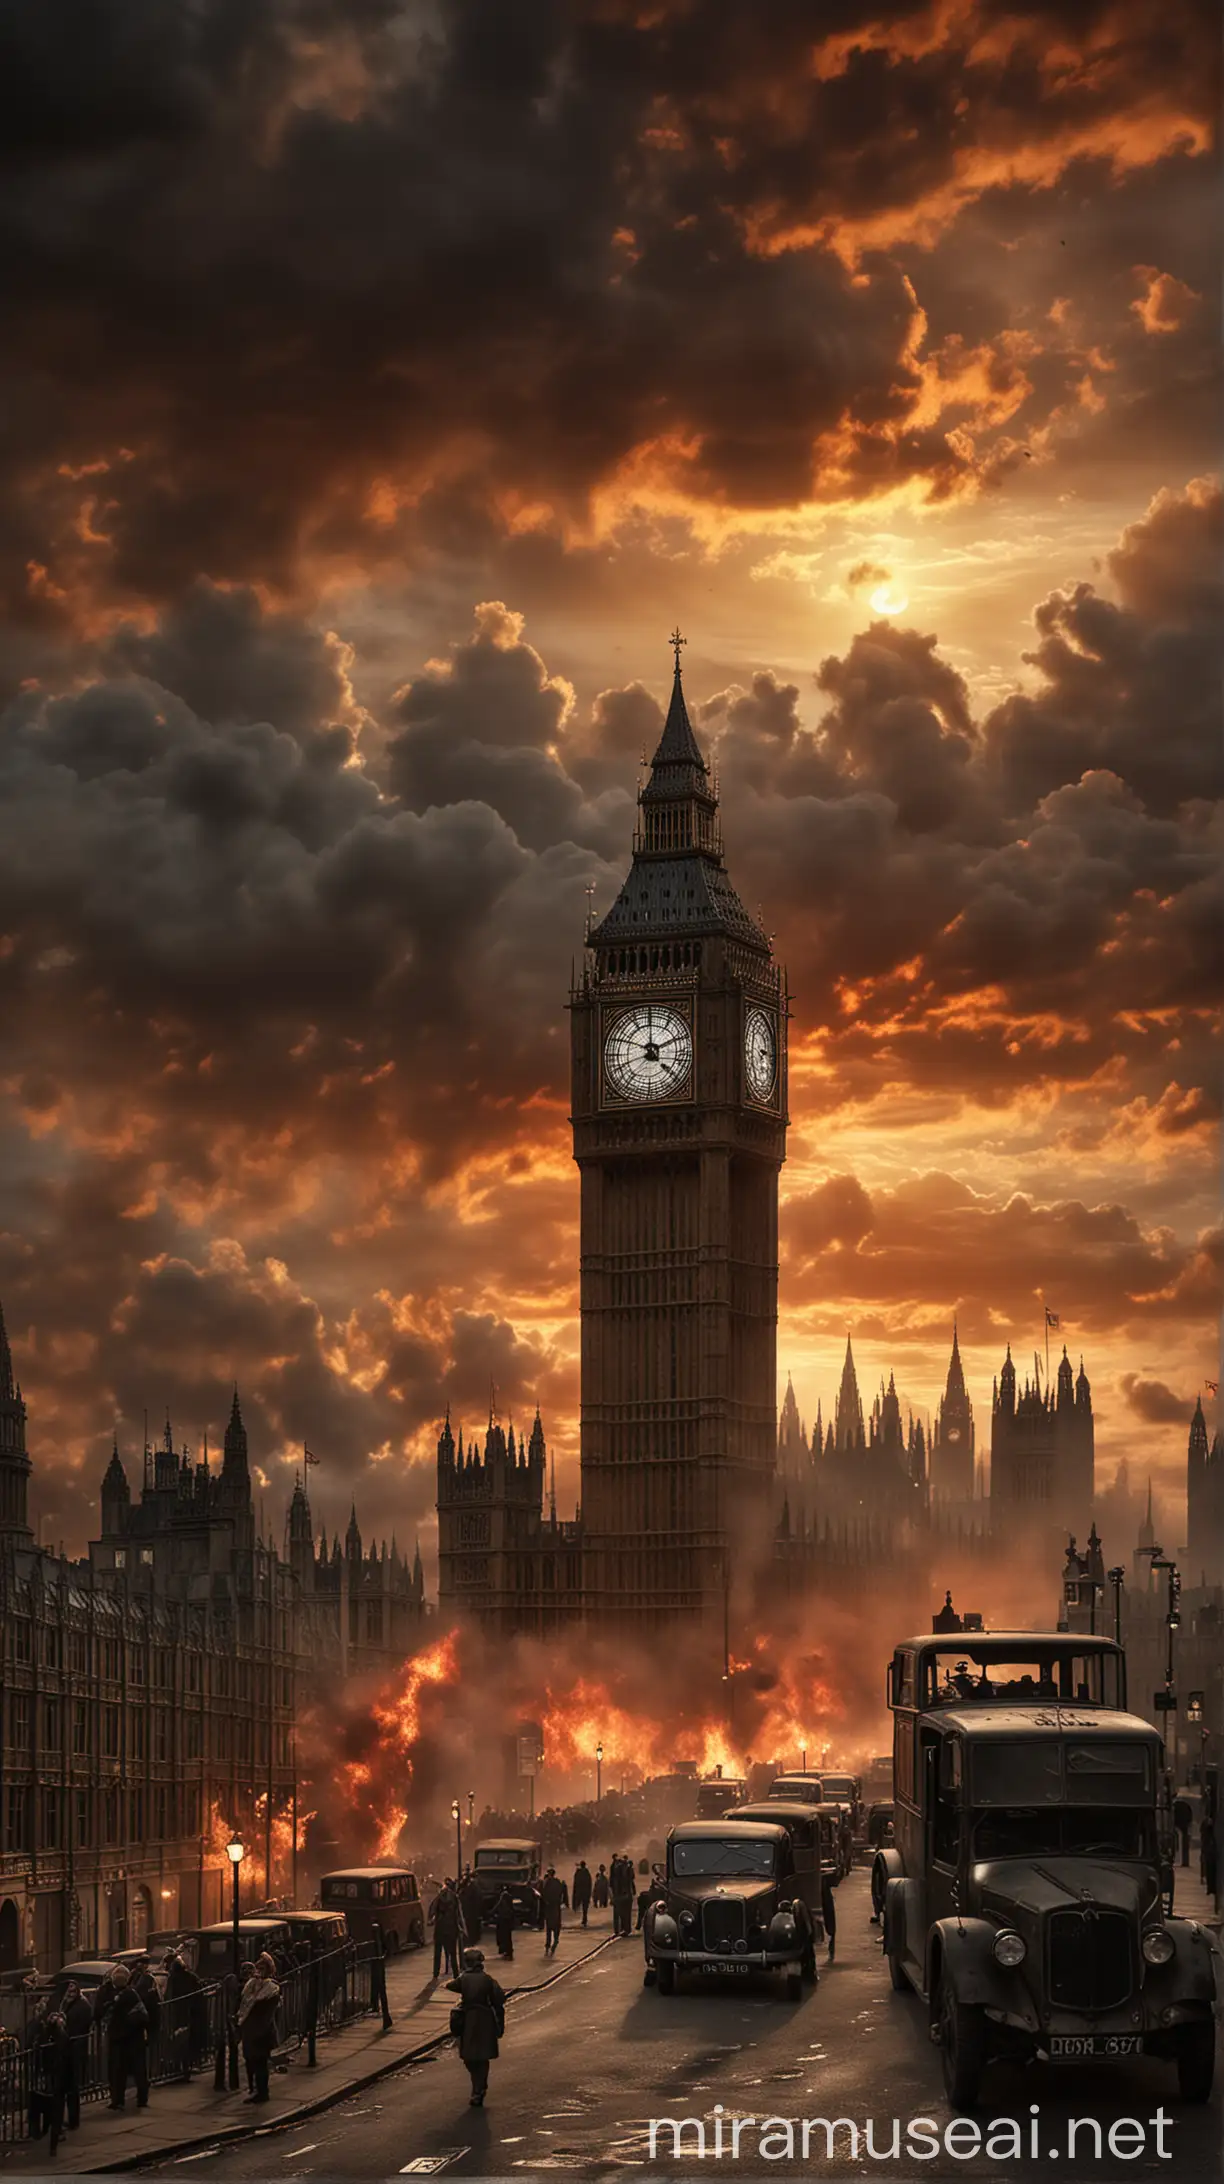 A dramatic depiction of wartime London, with iconic landmarks such as Big Ben and the Houses of Parliament silhouetted against a fiery sky. hyper realistic